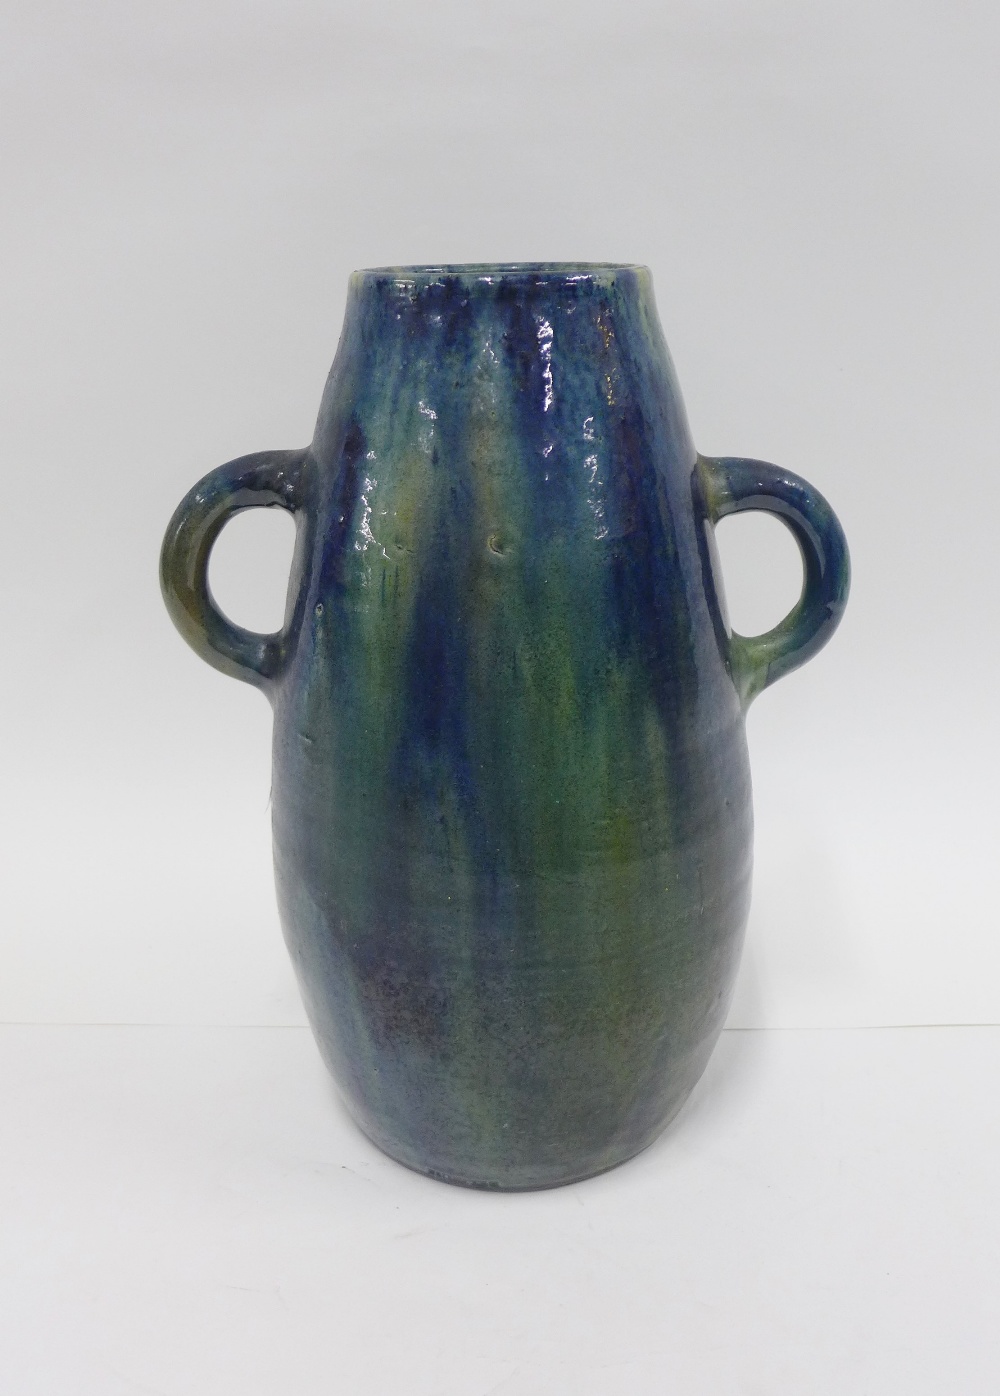 Continental art pottery vase with looping handles and a green and blue streaked glaze, 32cm - Image 2 of 3